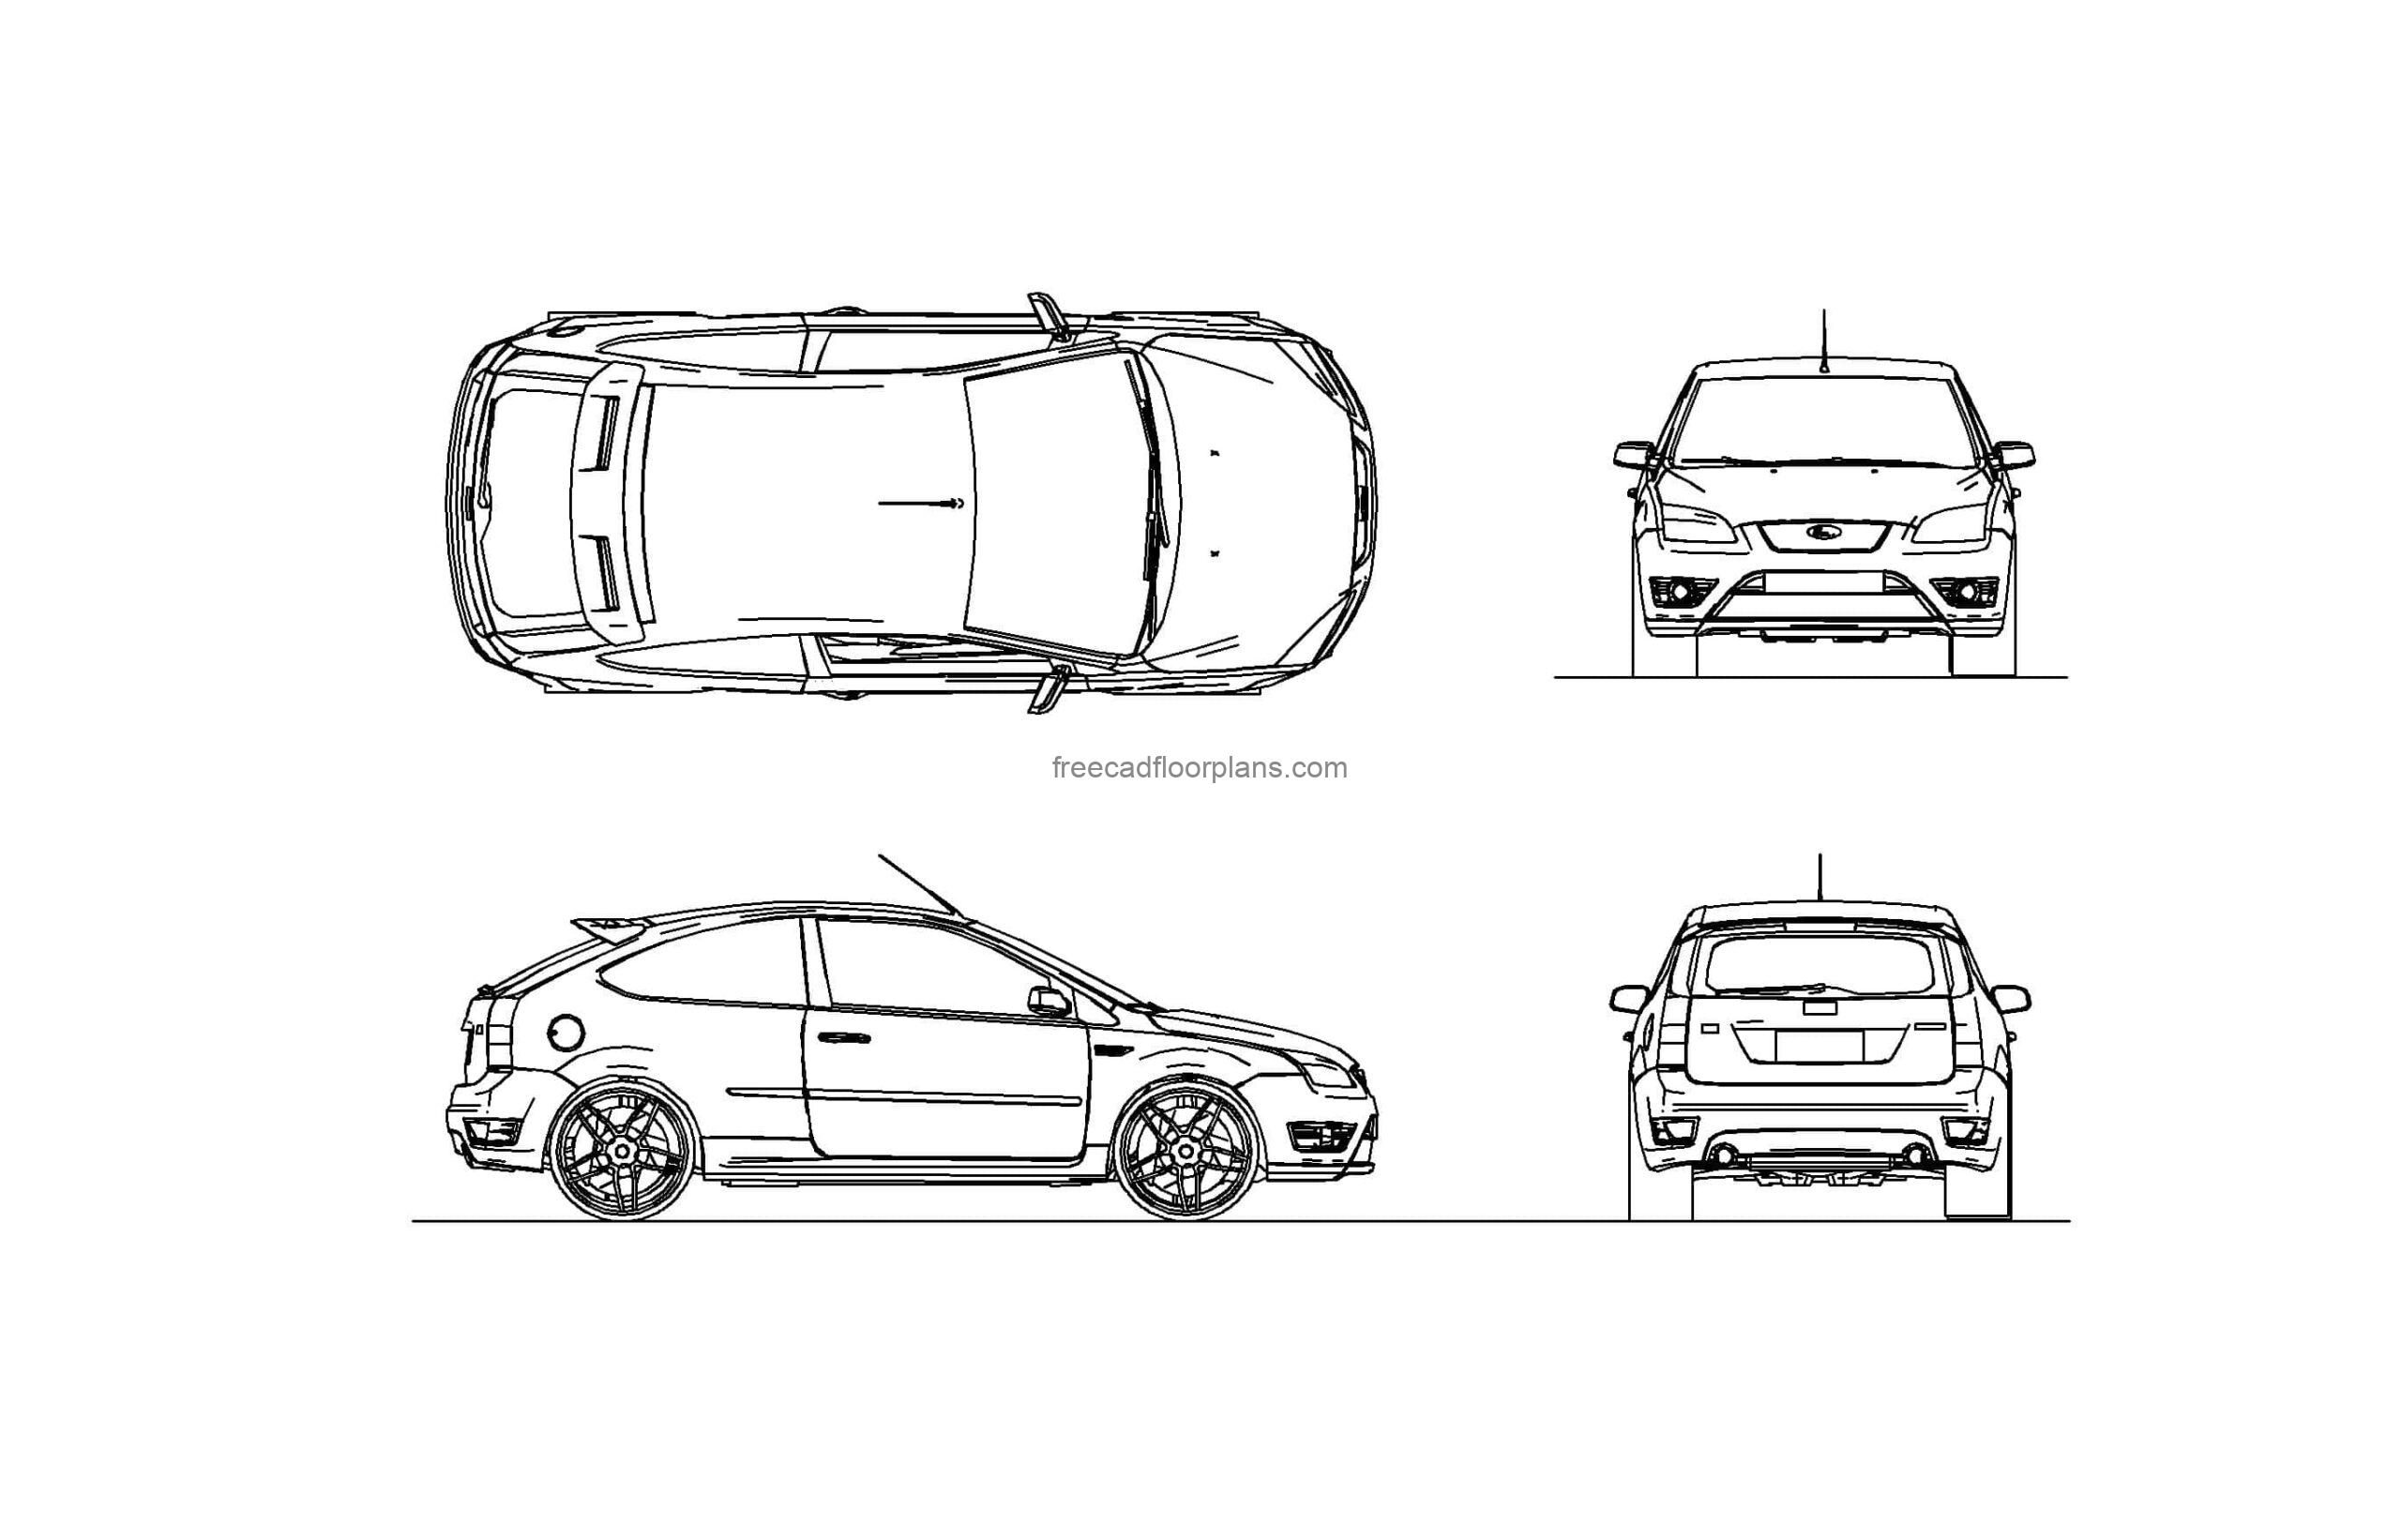 autocad drawing of a ford focus vehicle, plan and elevation 2d views, dwg file for free download